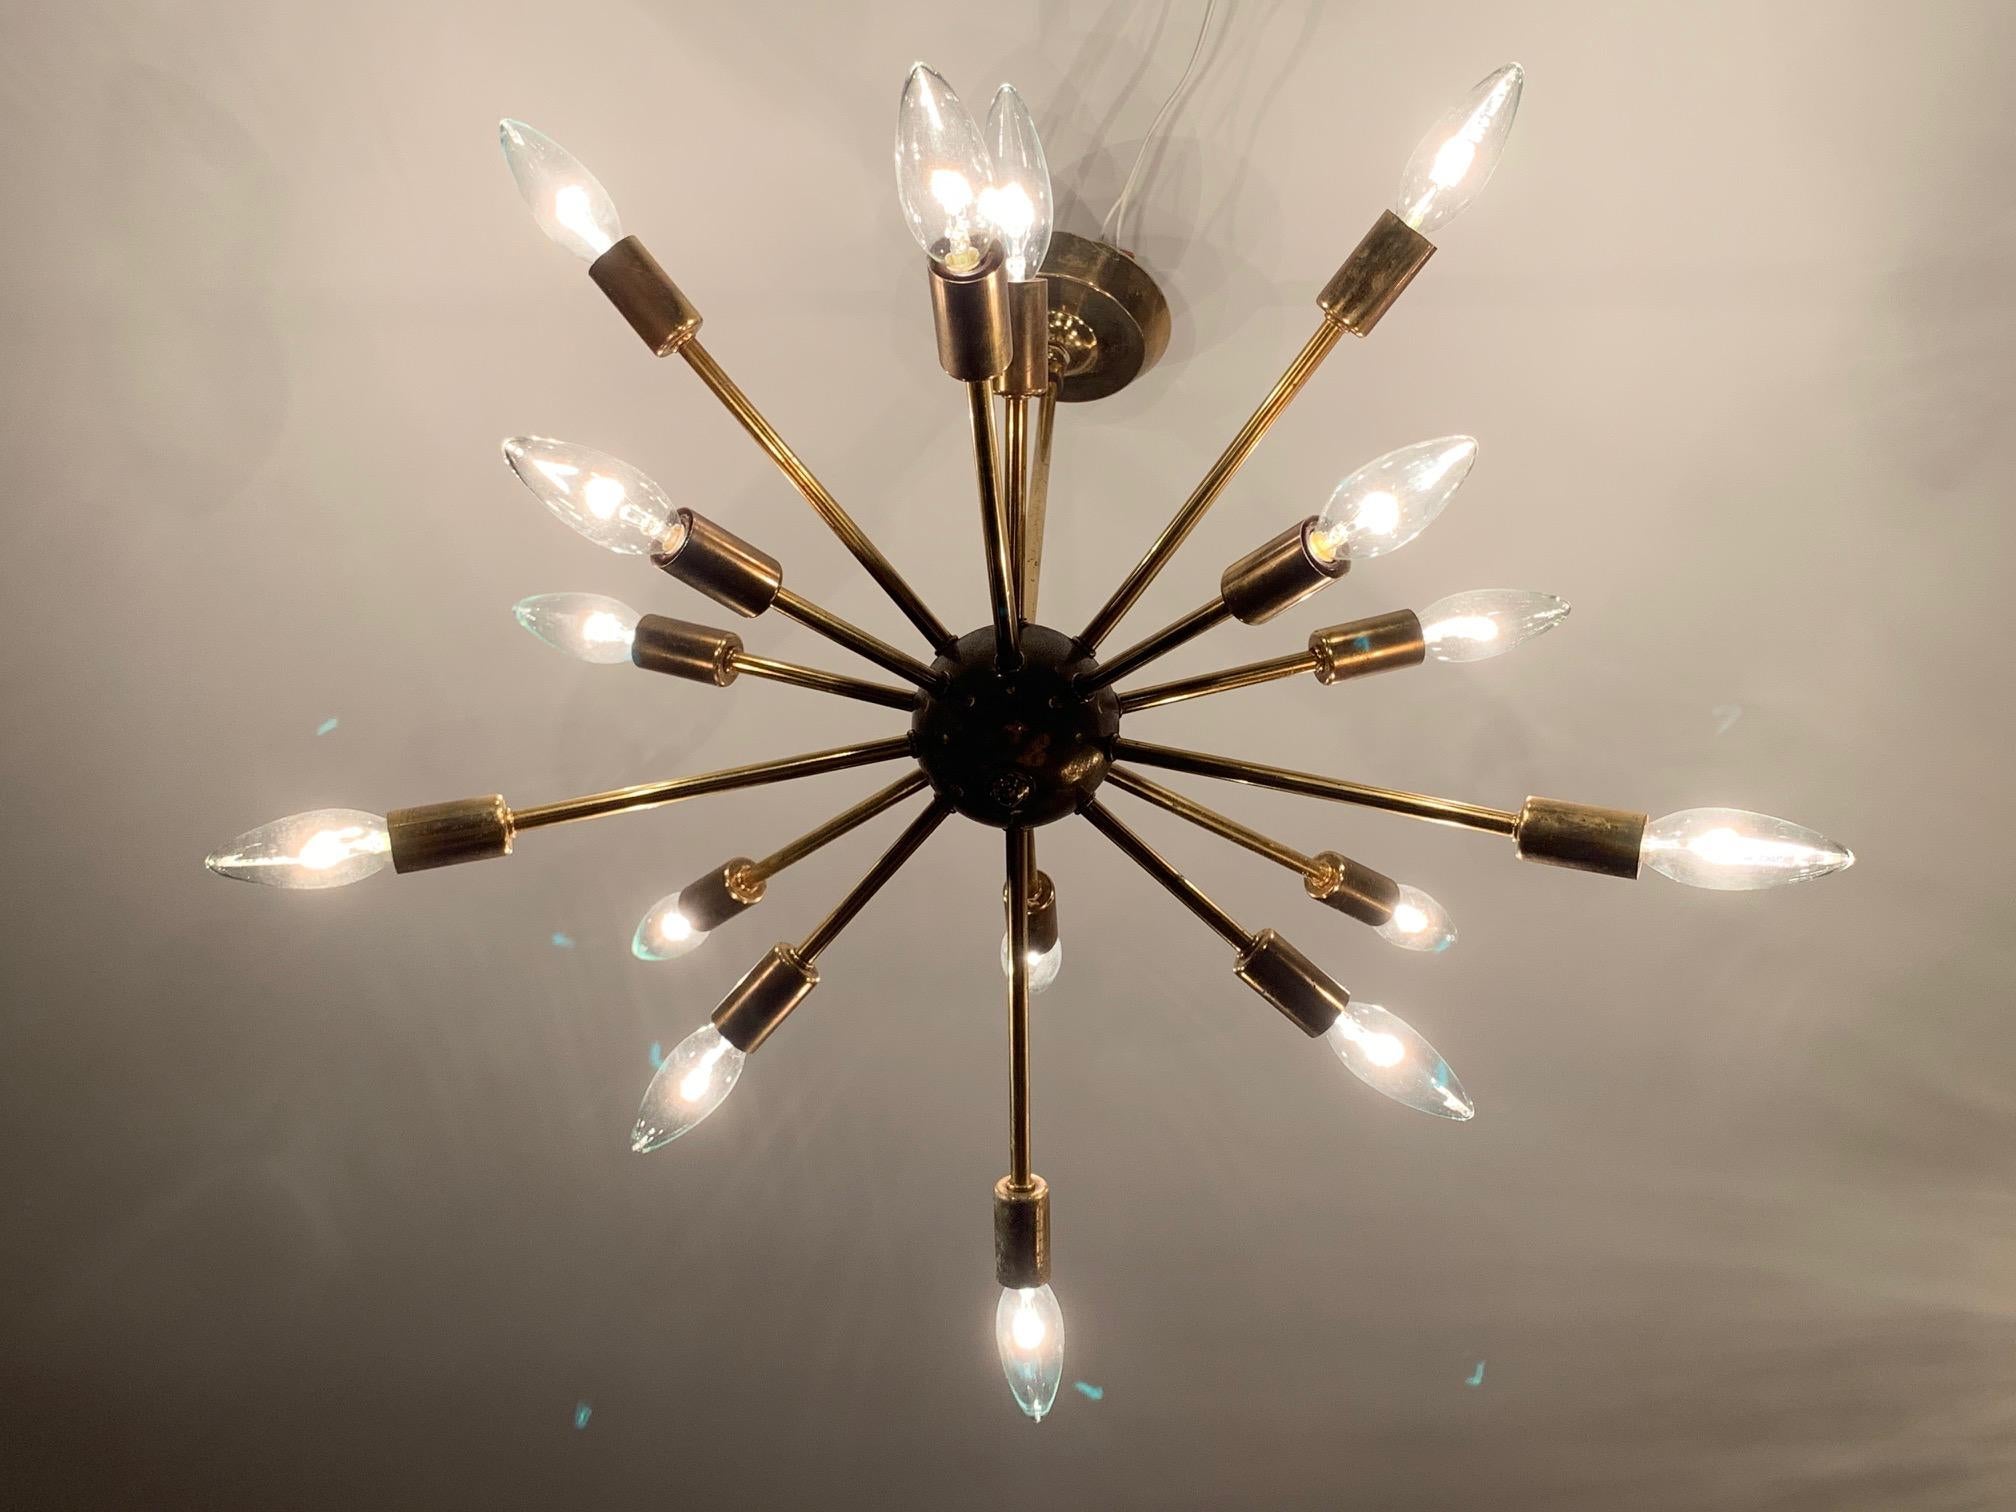 A classic sputnik, brass chandelier, 16 arms. Original canopy, original condition with nice patina! A real midcentury look that never goes out of style.
  